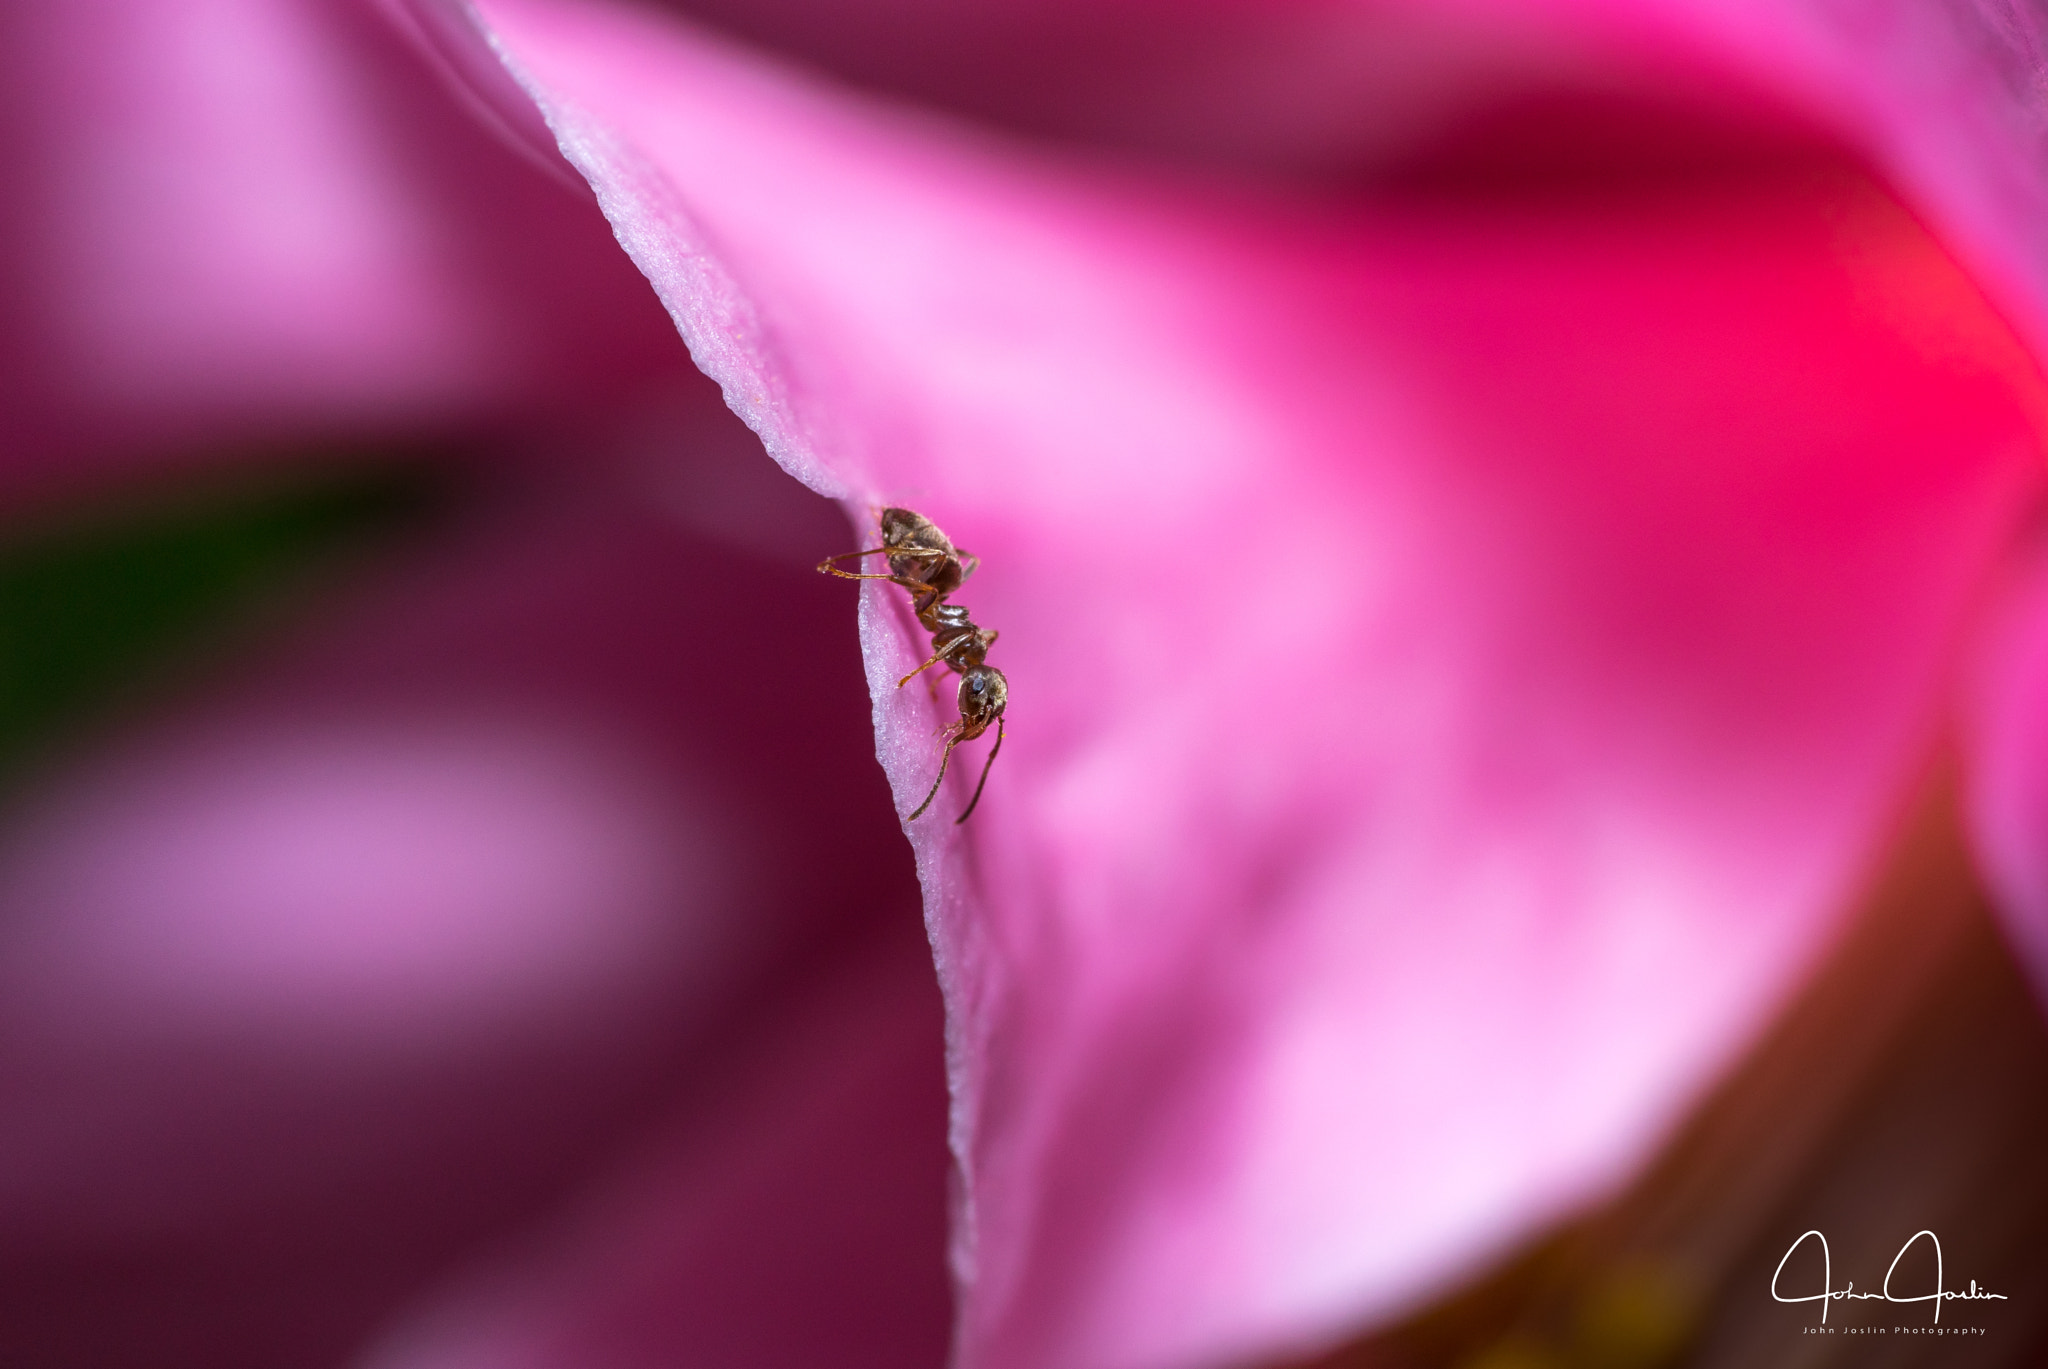 Sony a7 sample photo. Ant on a sea of pink photography